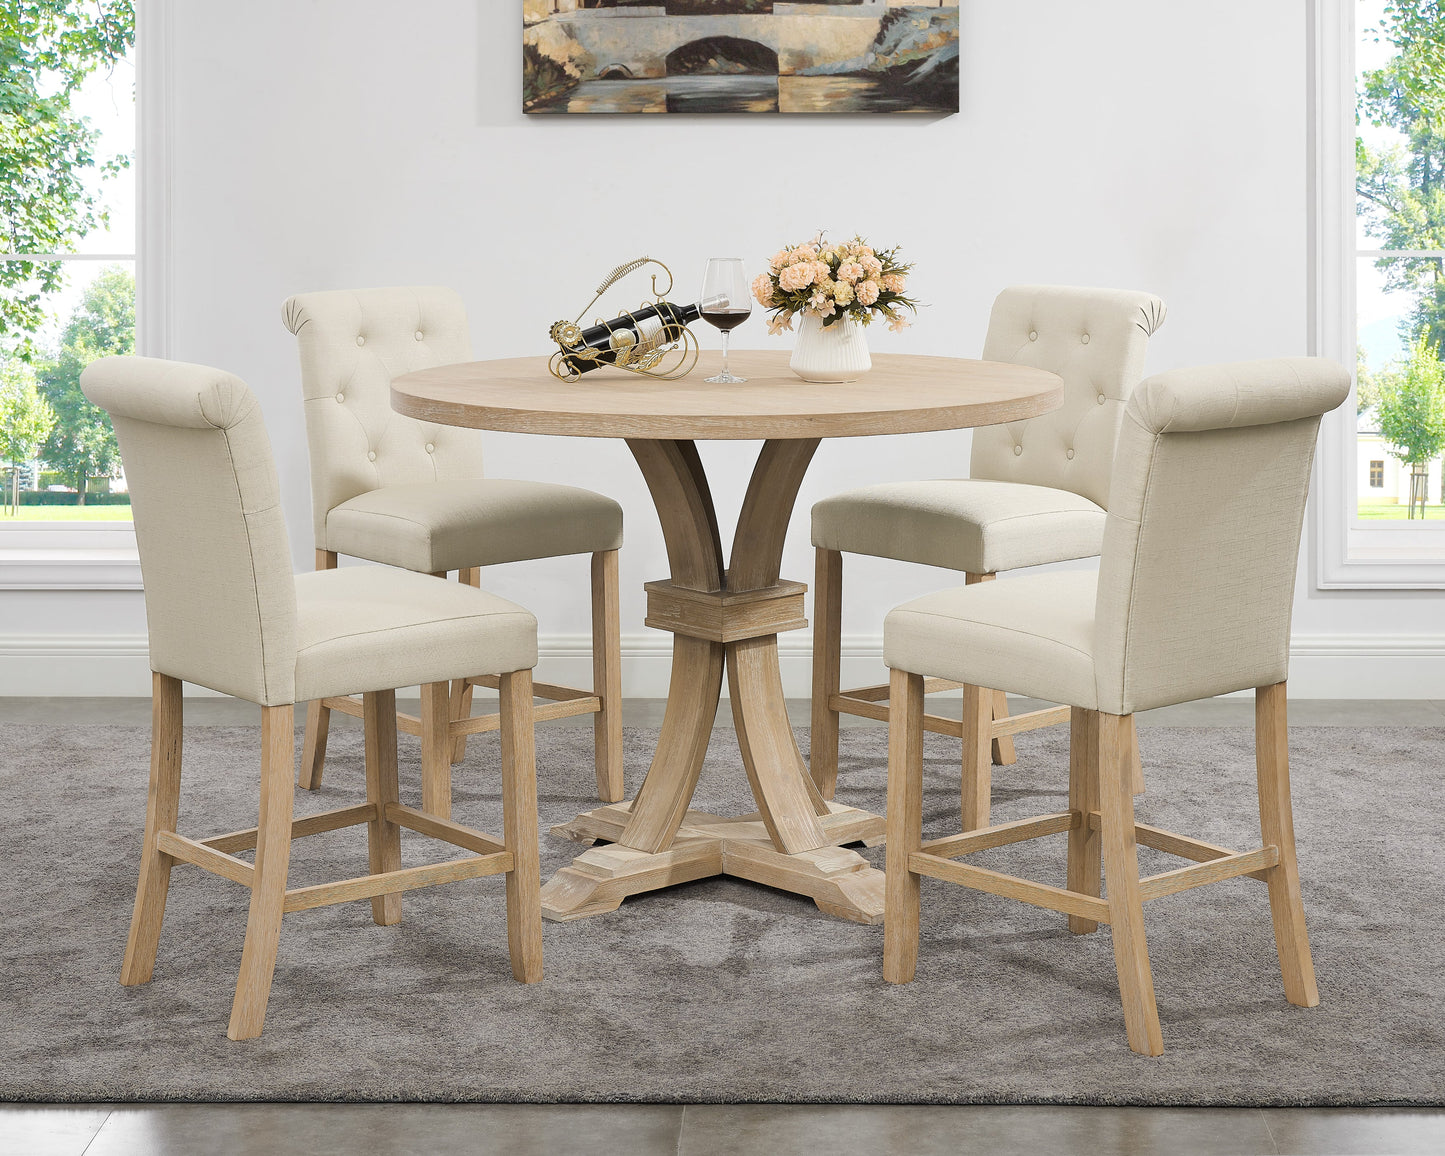 Siena White-washed Finished 5-Piece Counter Height Dining set, Pedestal Round Table with Tan Chairs